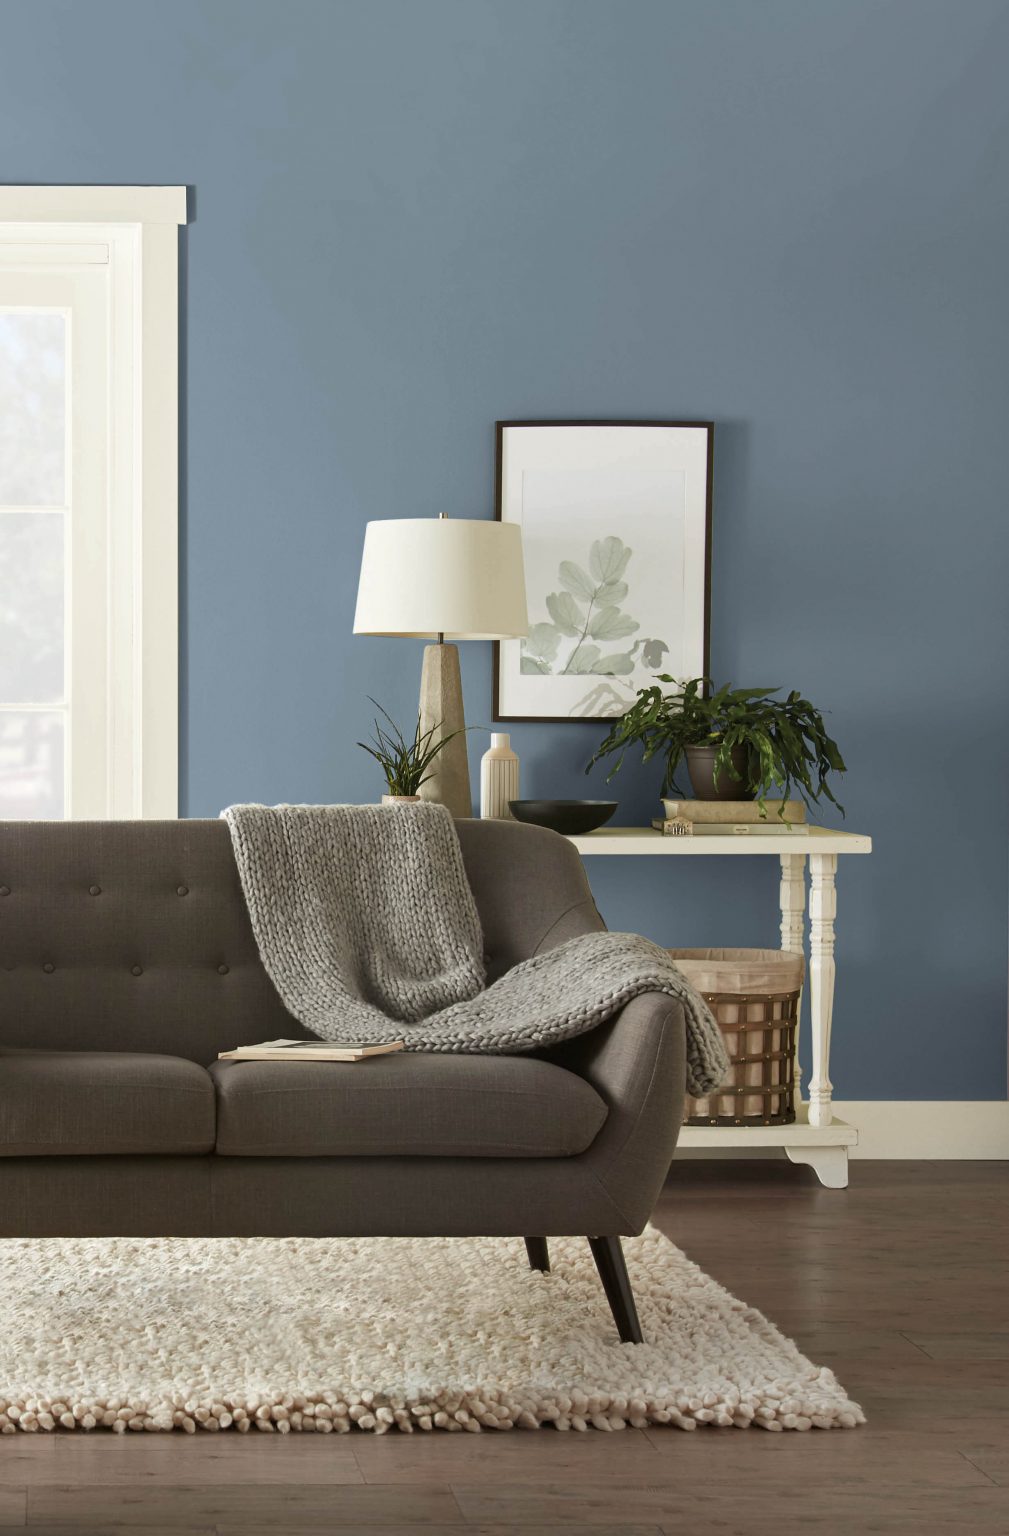 A simple living room with walls painted in Adirondack Blue